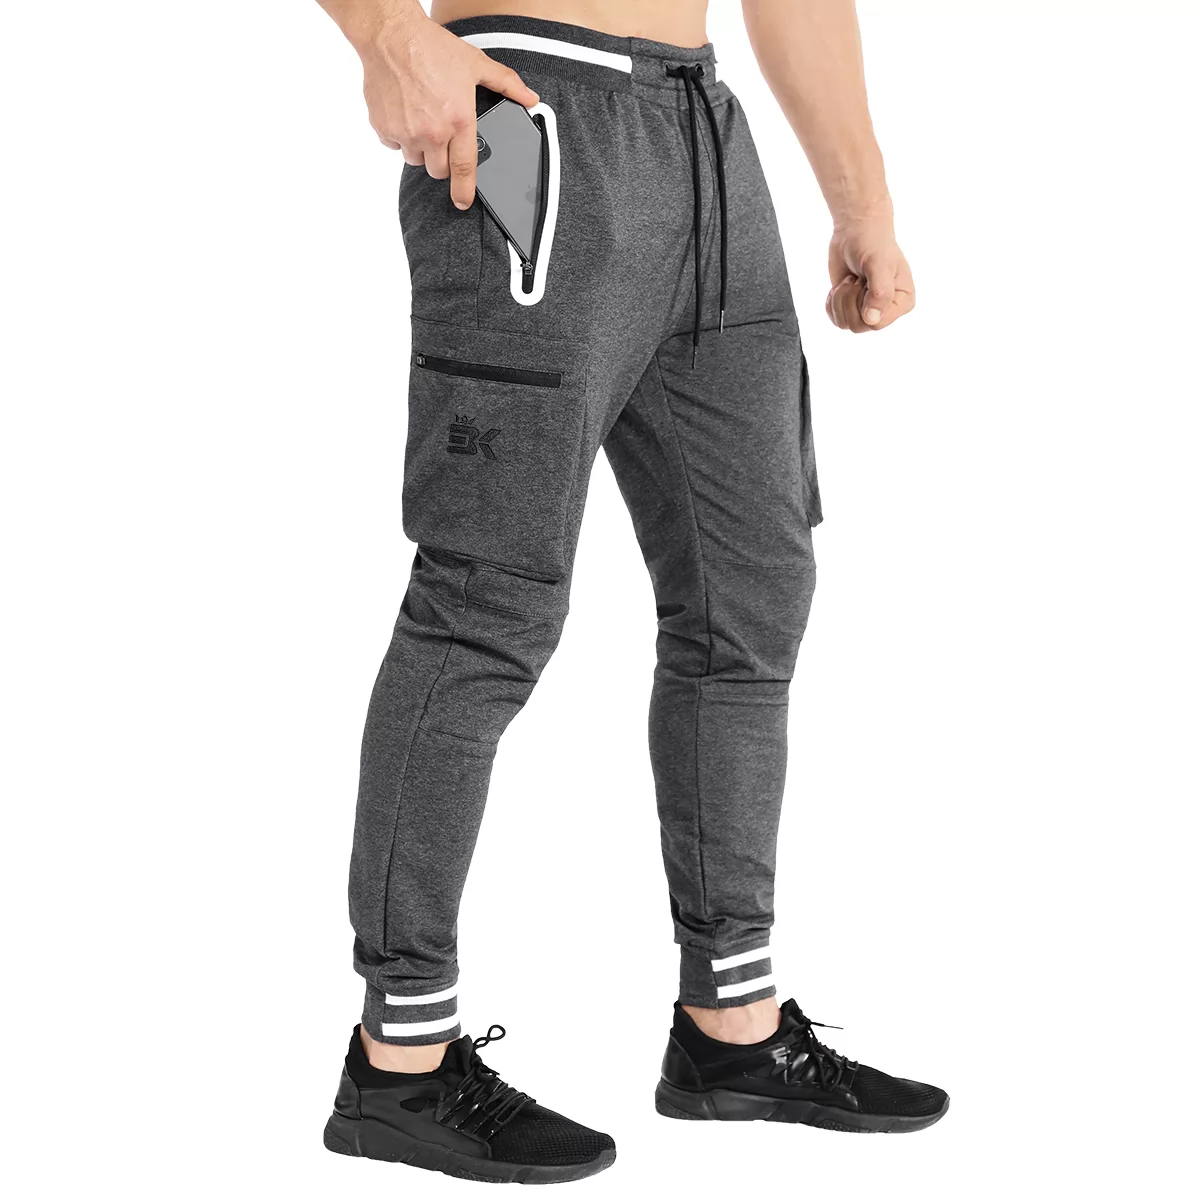  bwdbhd Mens Tapered Workout Running Pants, Jogger Training  Sweatpants Slim Fit with Zip Pockets Joggers for Men Fashion zyoptiop :  Clothing, Shoes & Jewelry